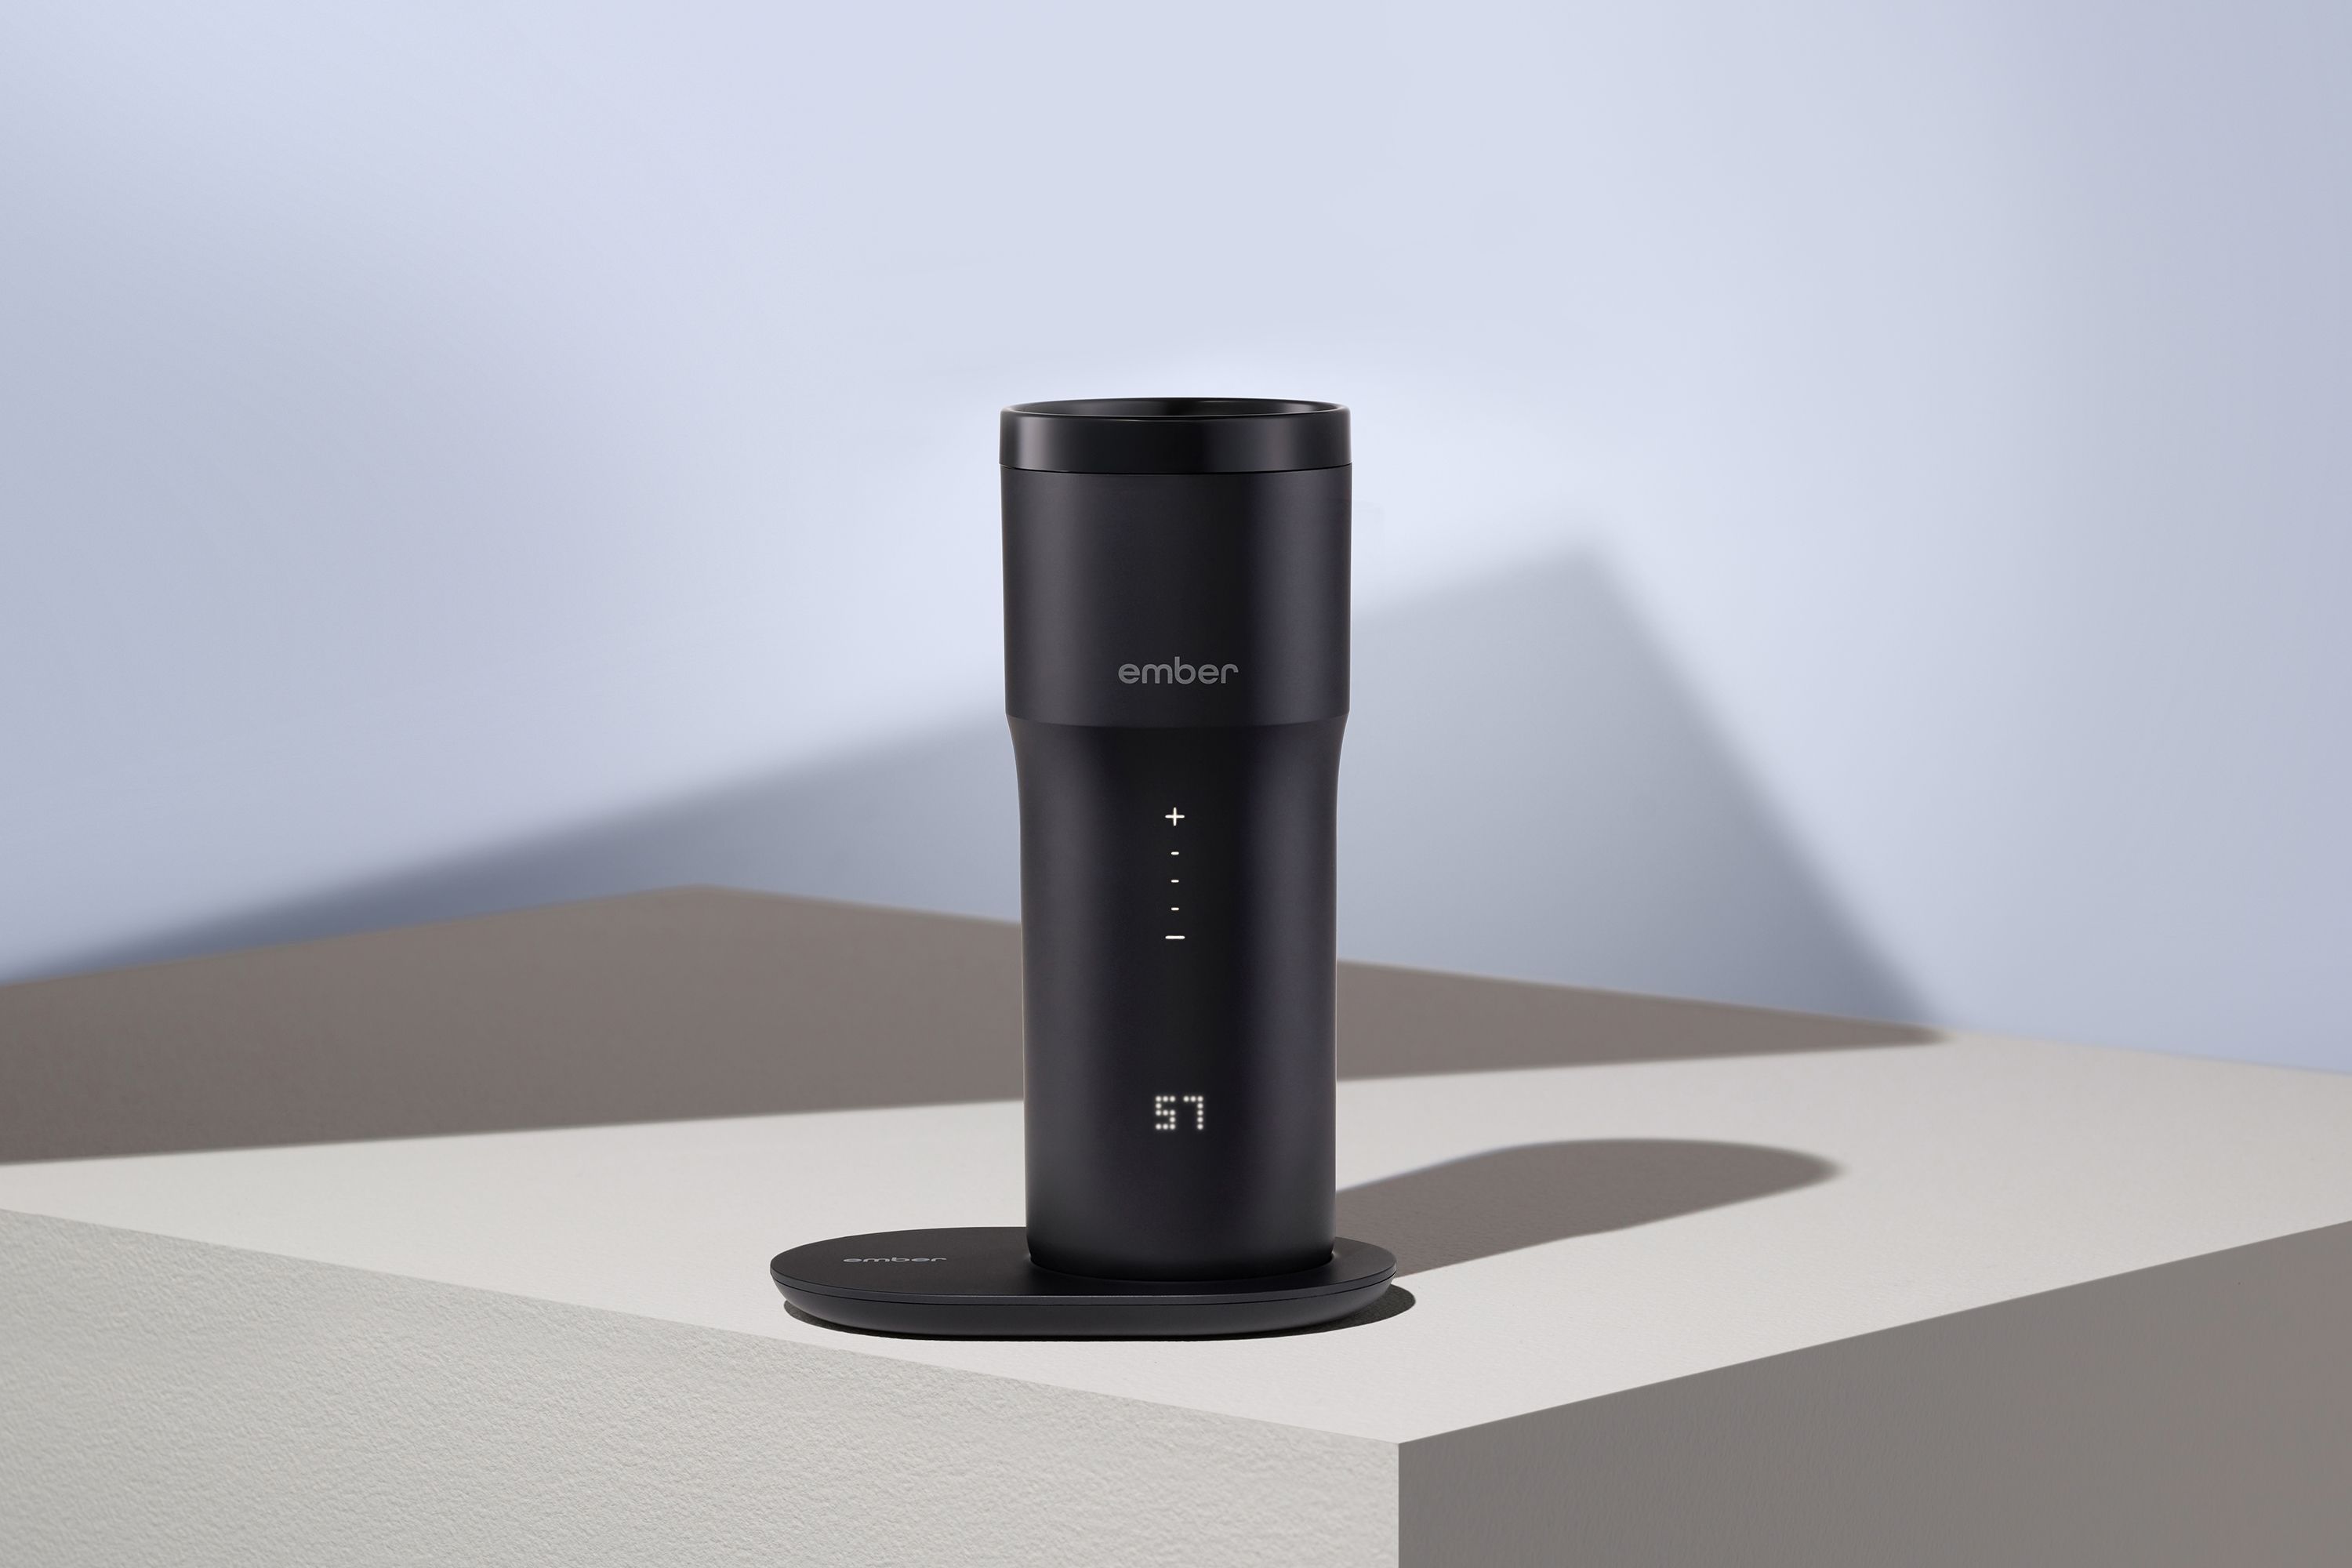 Ember Travel Mug 2s improved battery keeps your coffee warm for three hours image 1